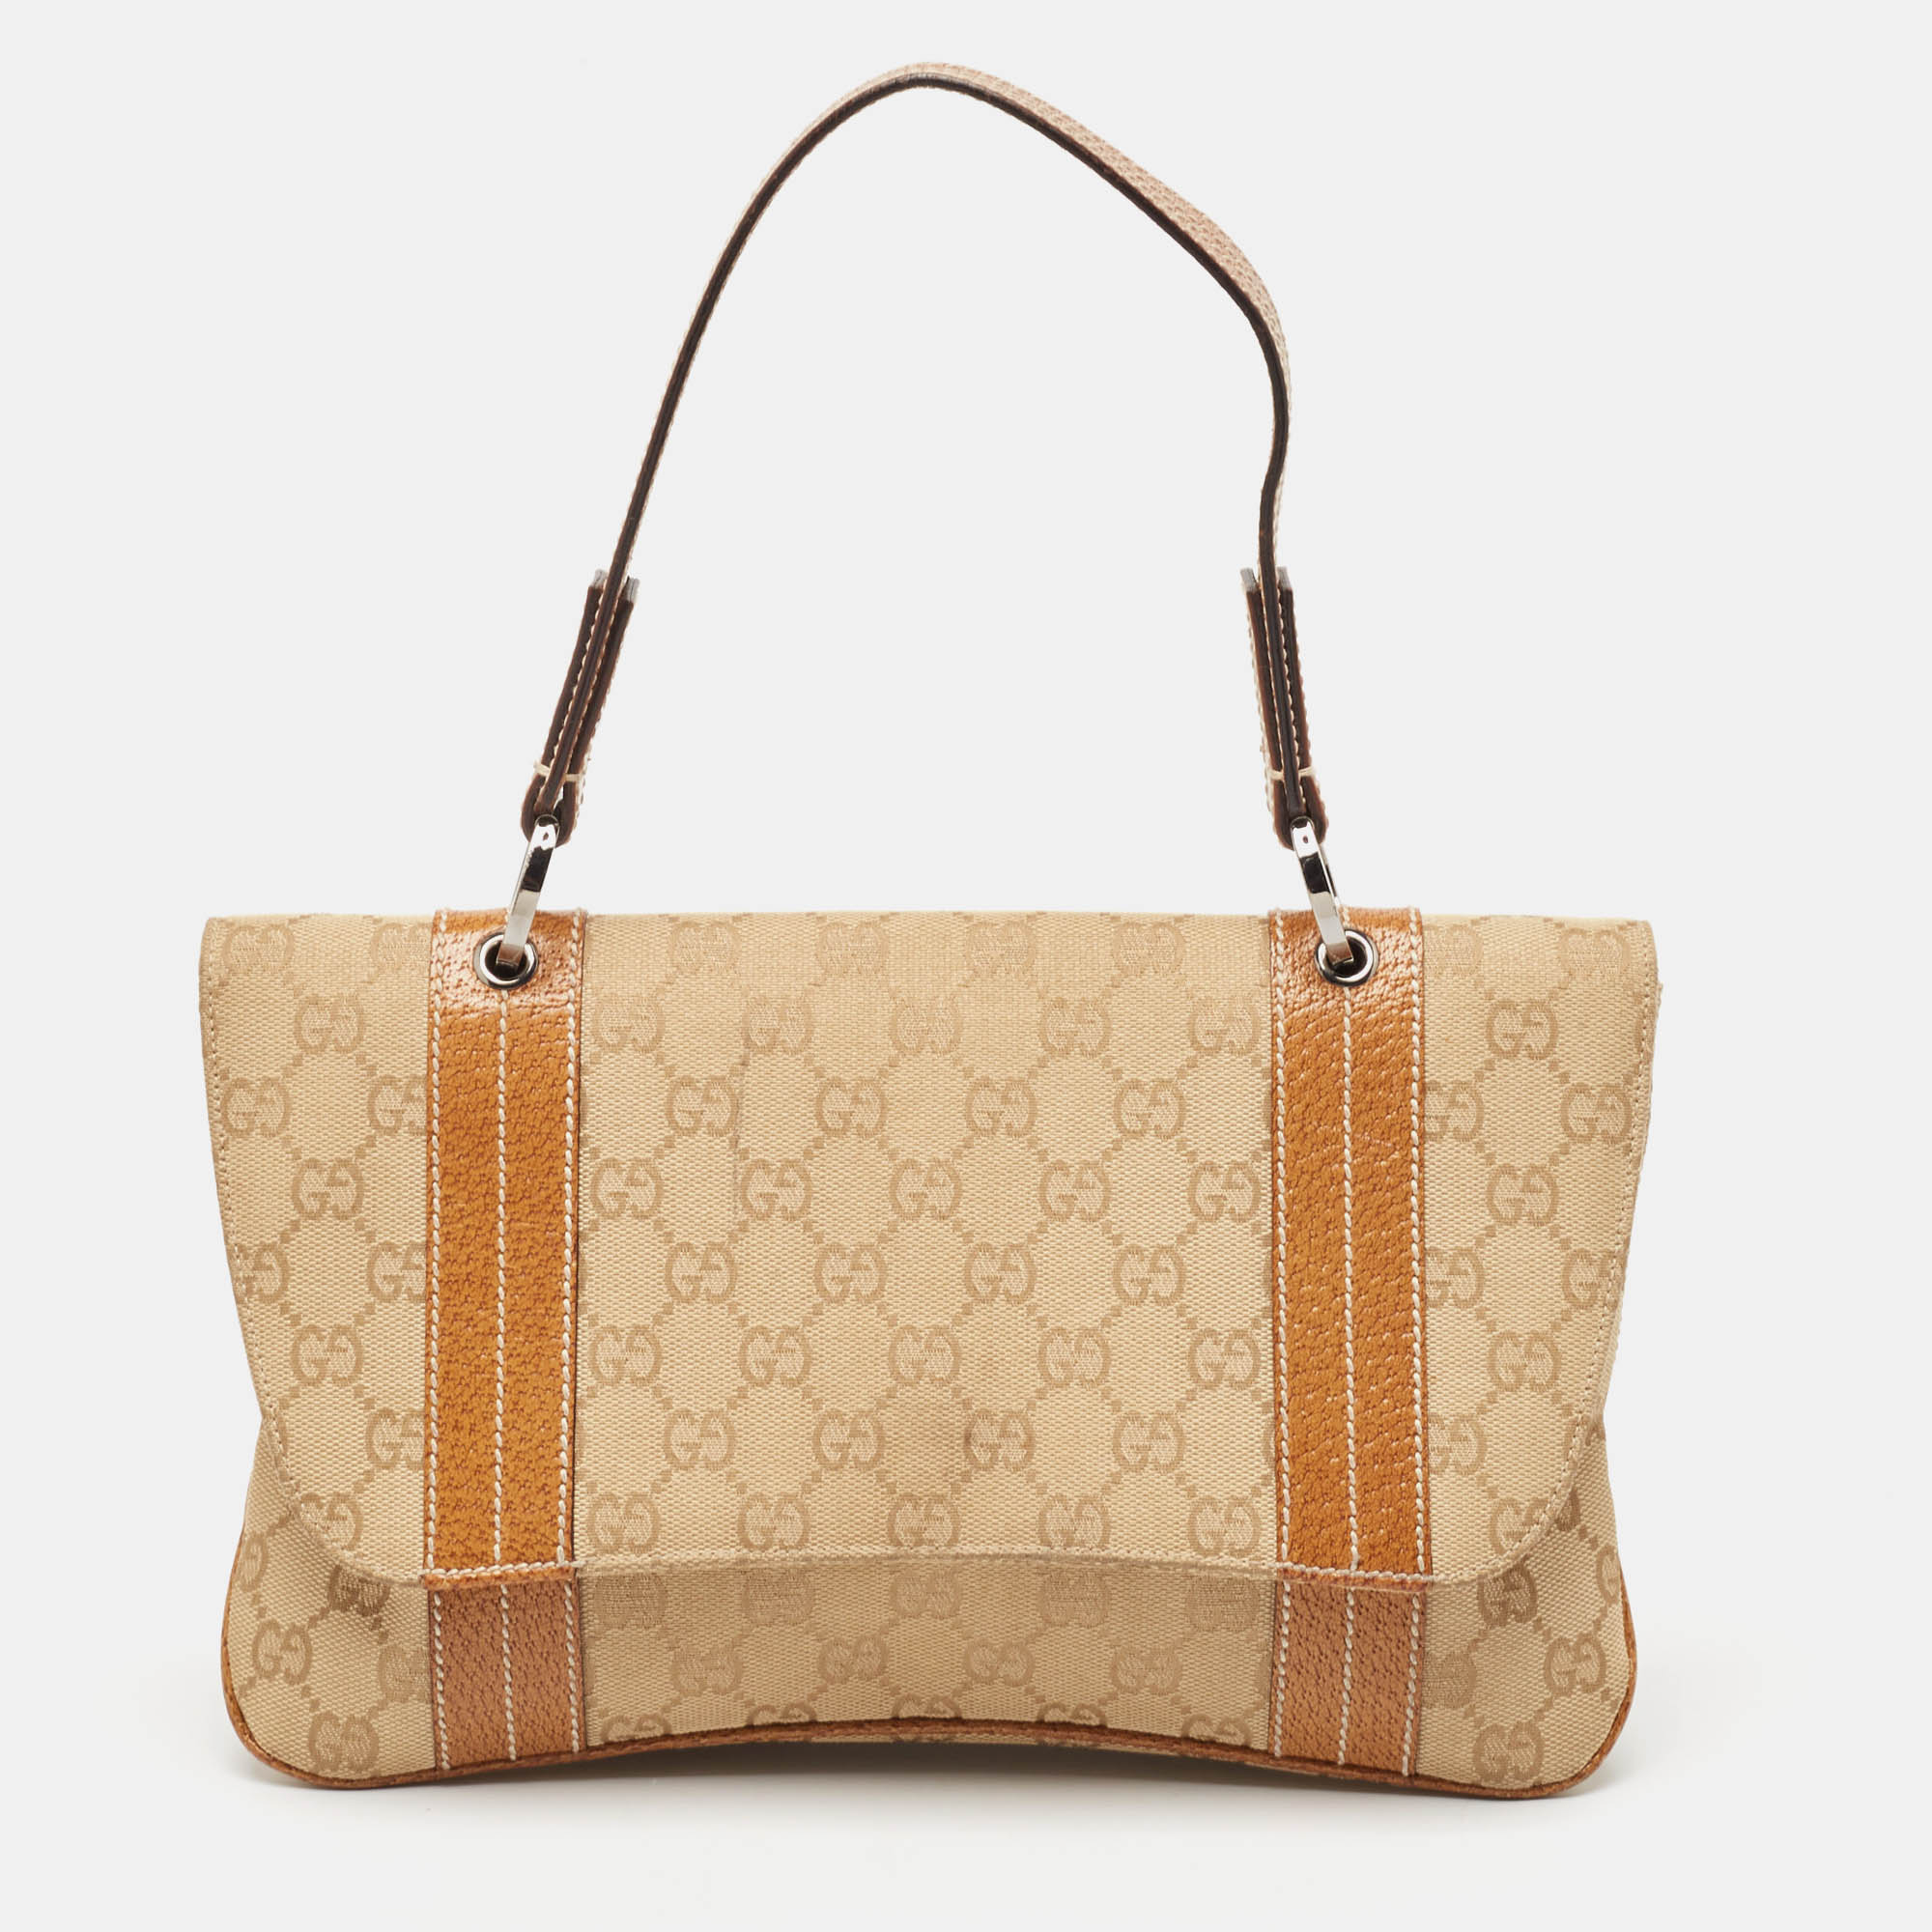 Gucci beige/brown gg canvas and leather flap top handle bag